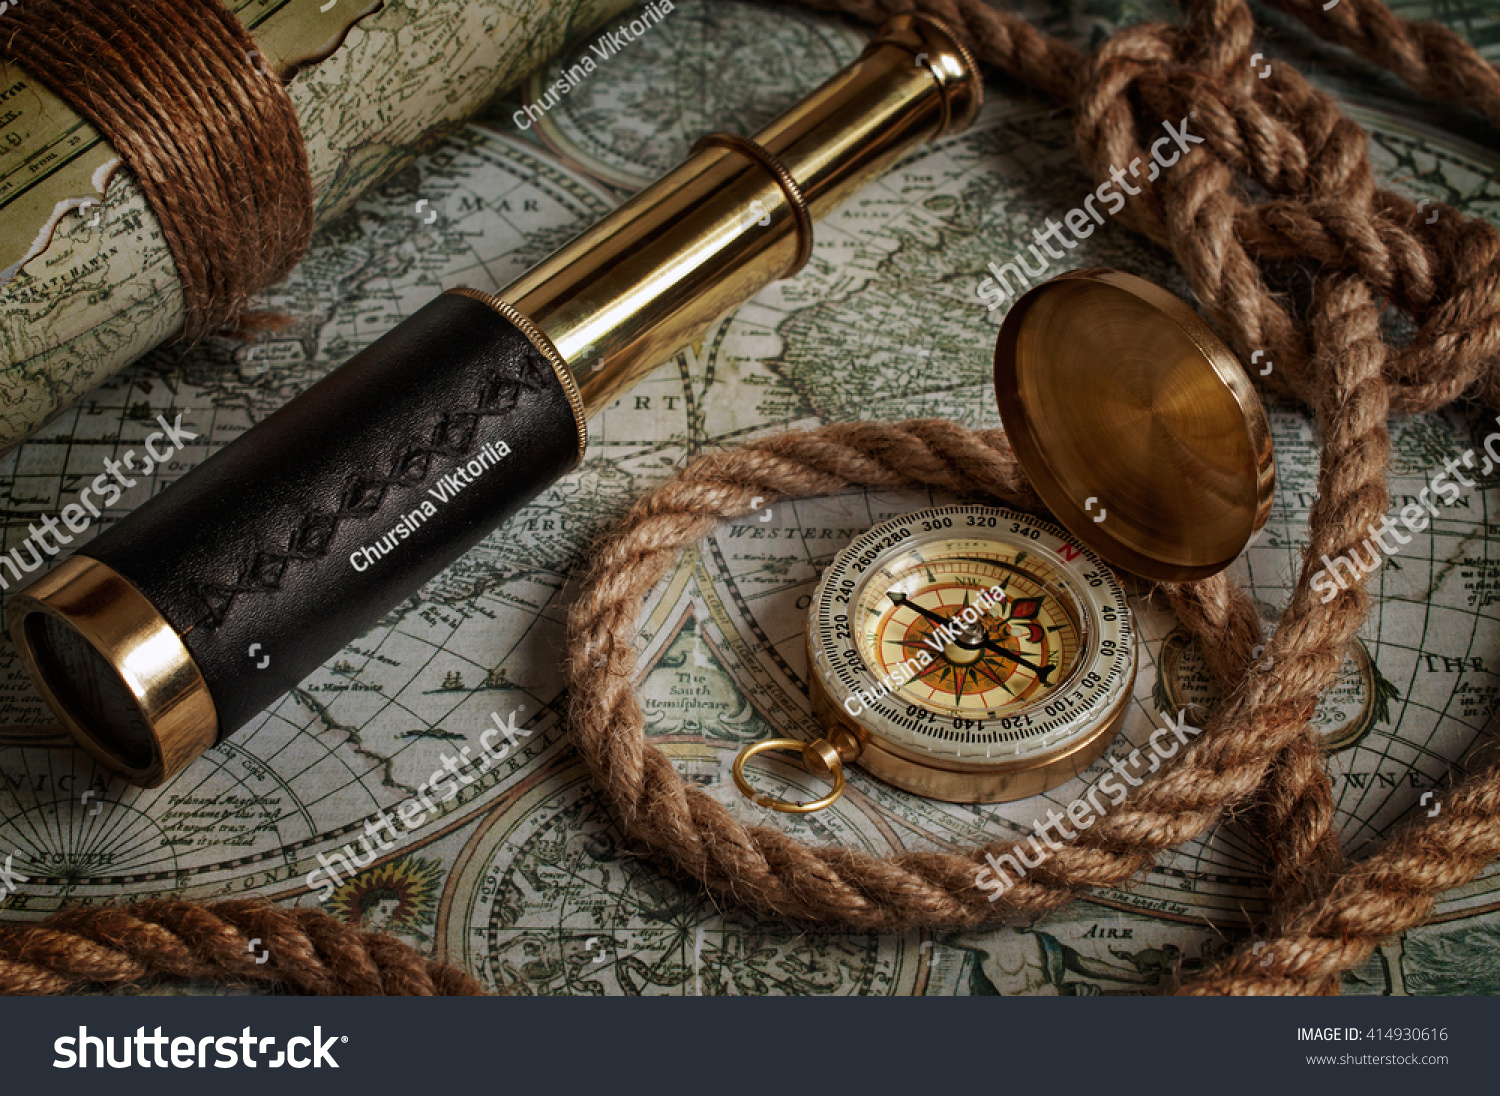 Nautical background with a navigation tools: telescope, compass and old maps #414930616